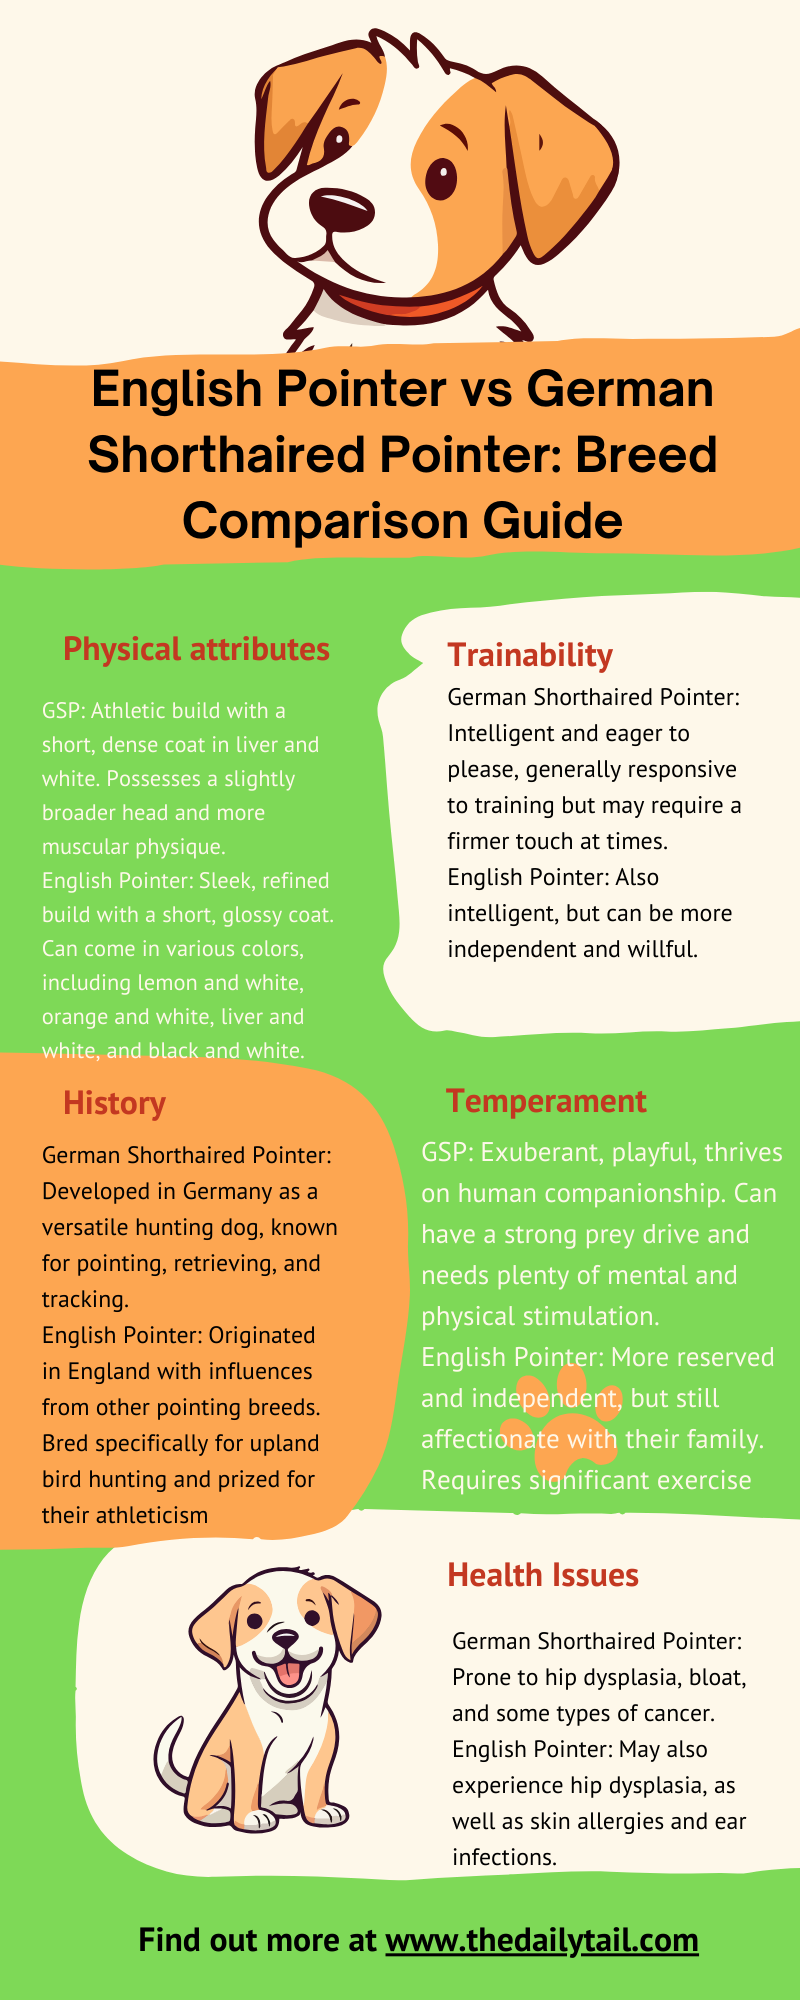 English Pointer vs German Shorthaired Pointer infographic